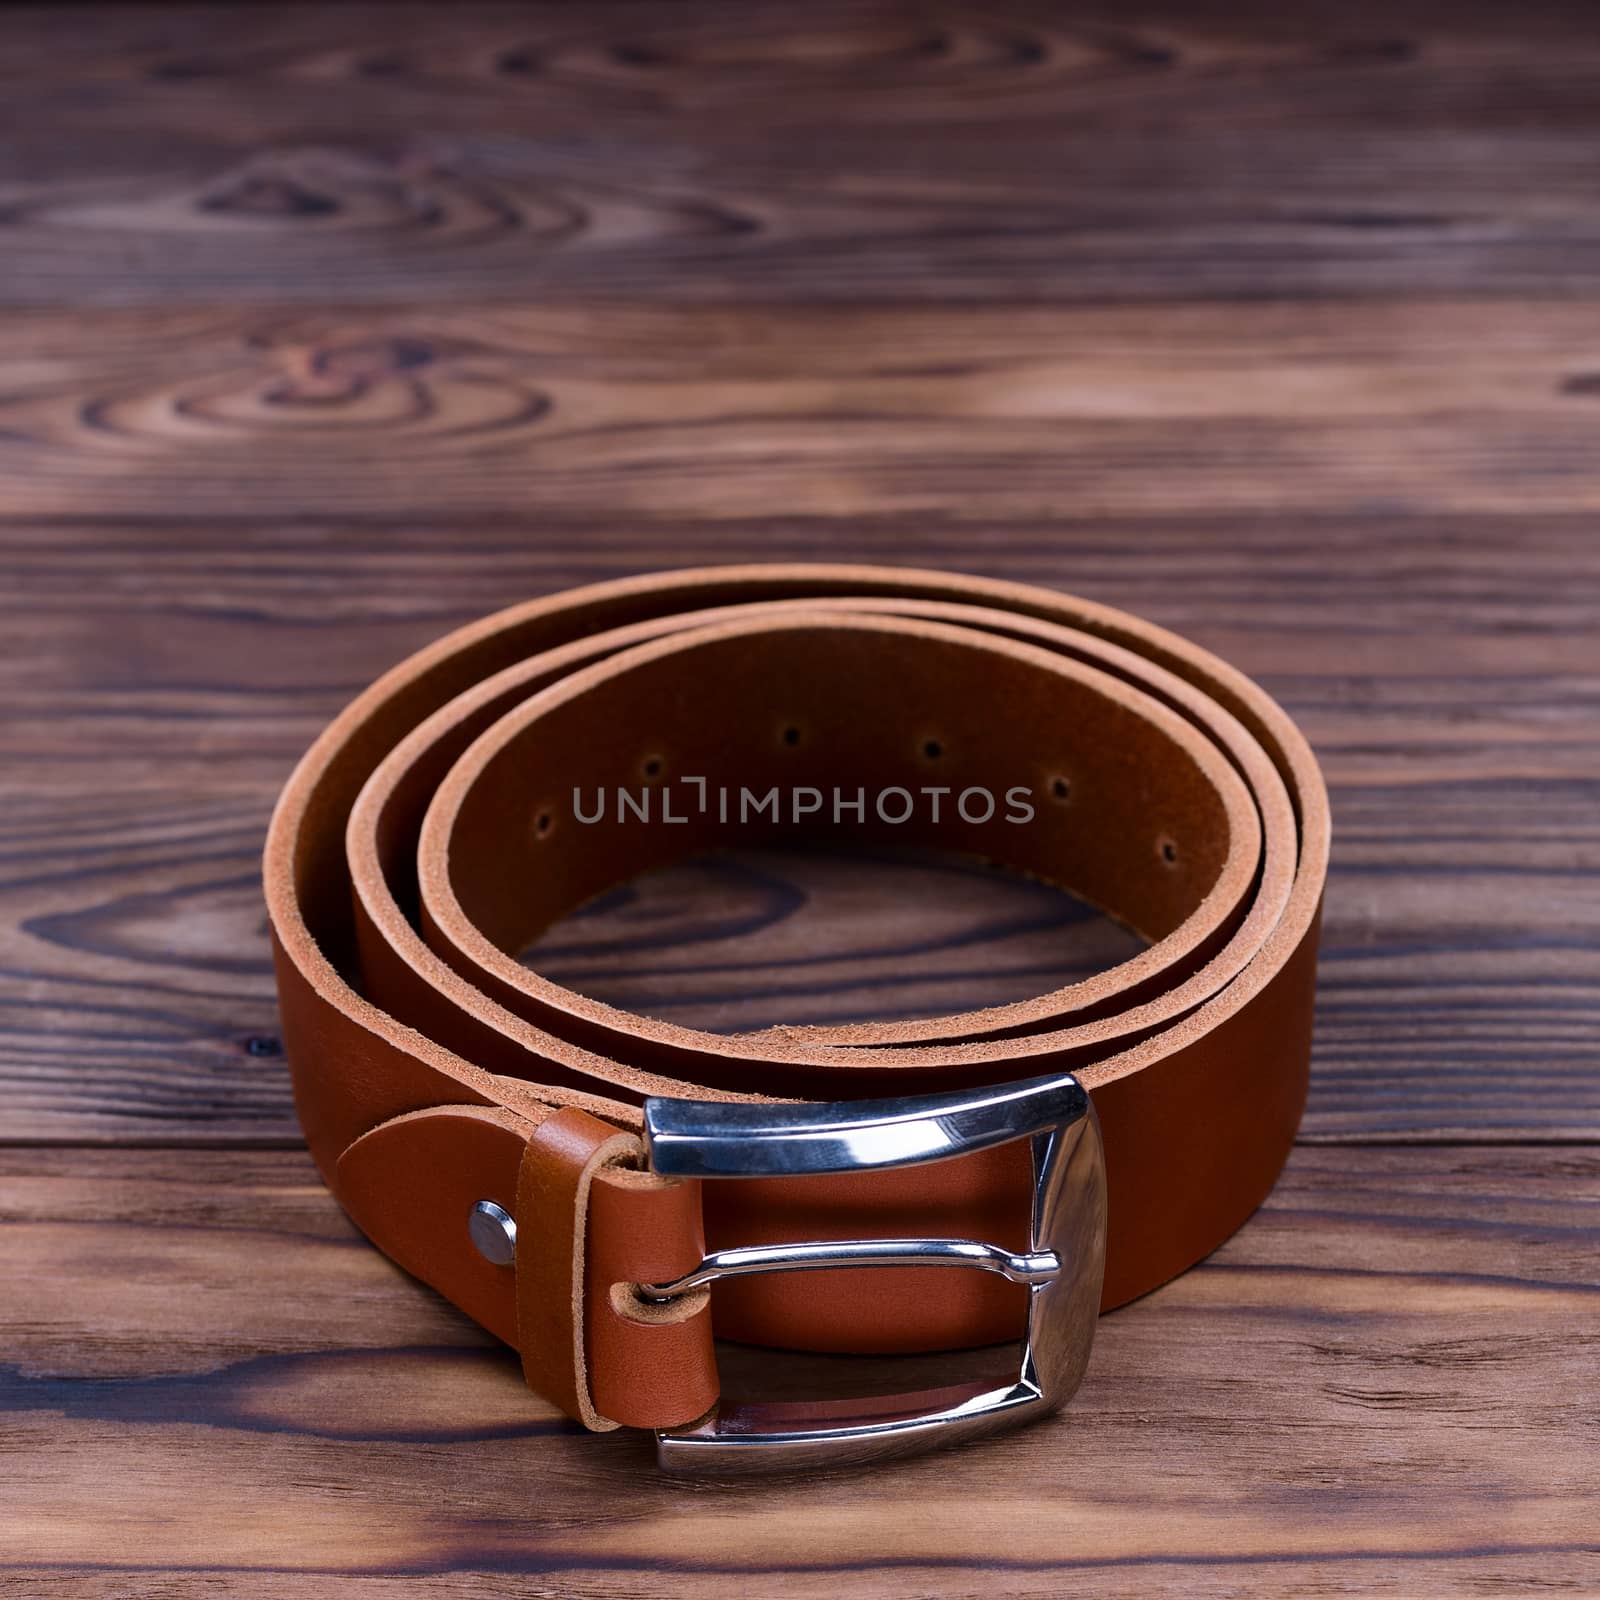 Ginger color handmade belt lies on textured wooden background. The belt is twisted into a ring. Closeup side view. Stock photo of businessman accessories.